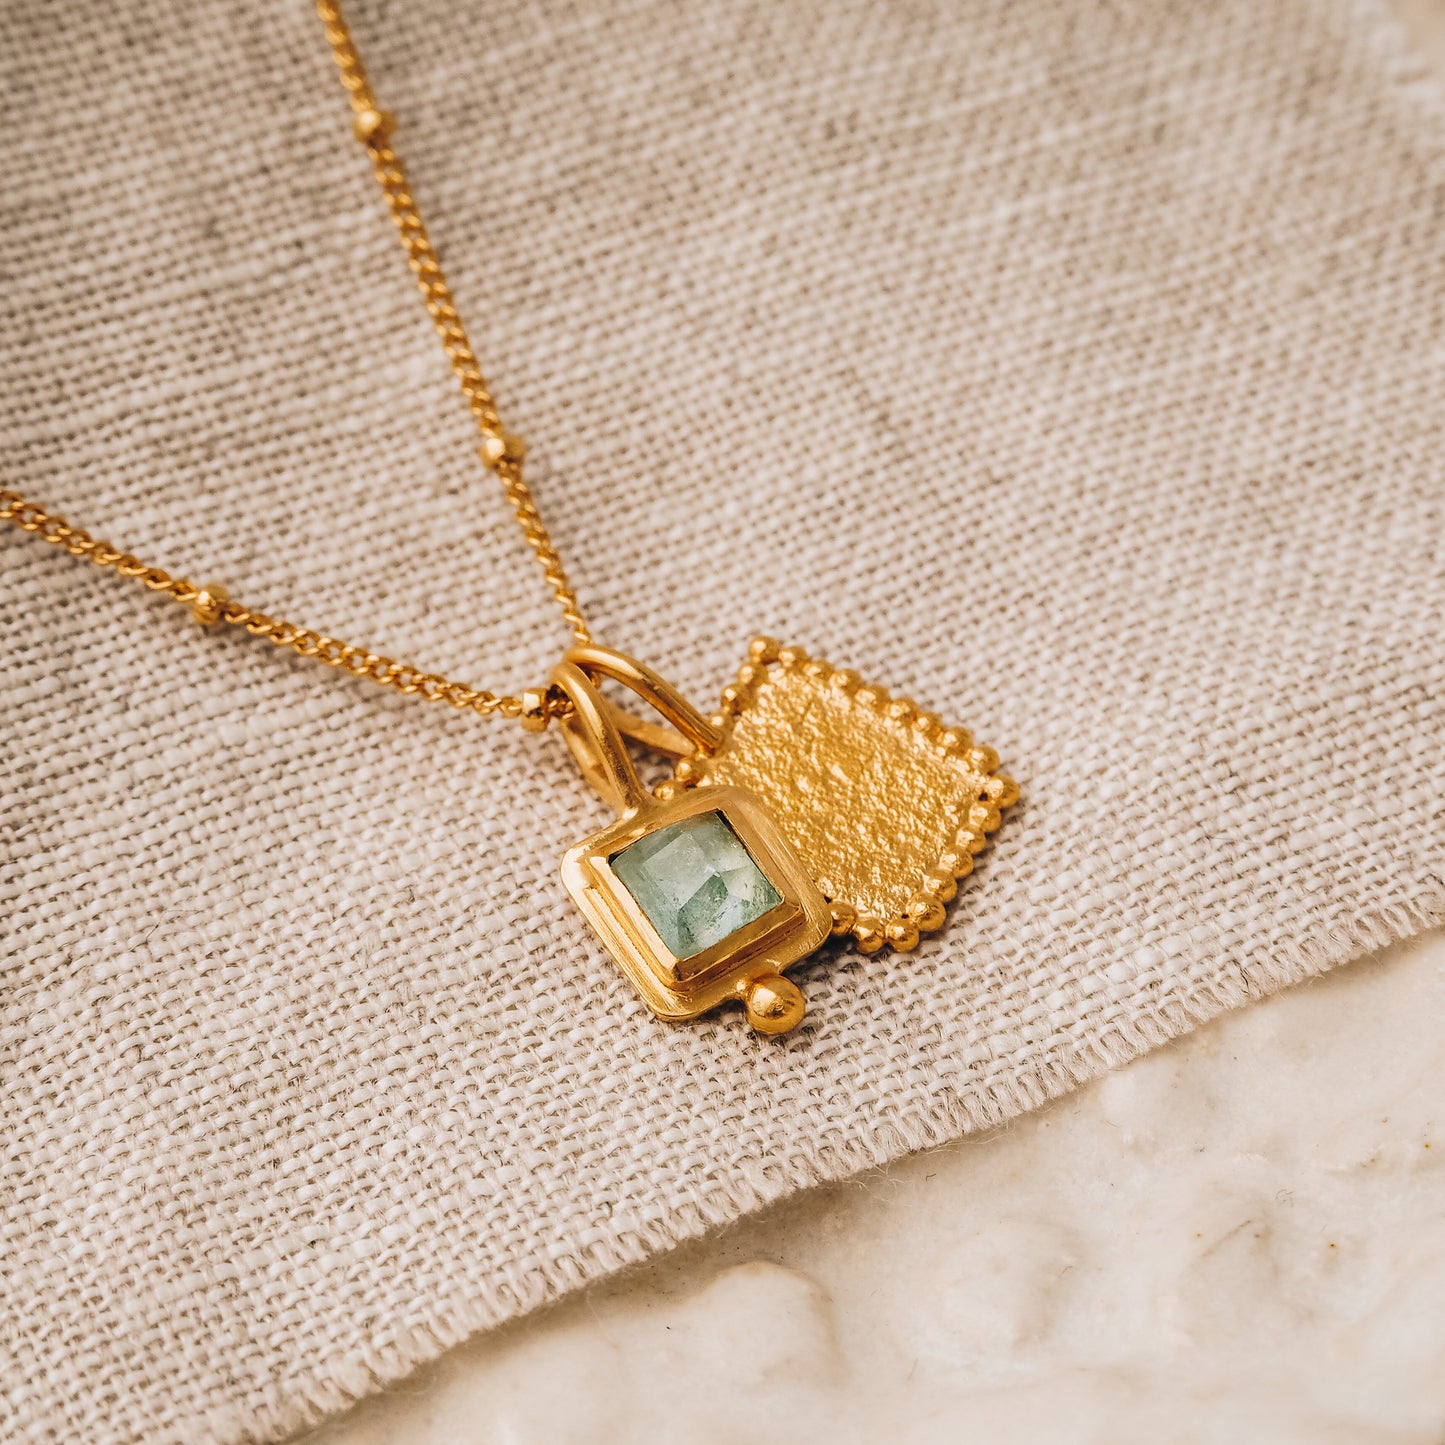 Square gold pendant adorned with a vibrant blue rose cut tourmaline gemstone and exquisite granulation, hanging gracefully from a delicate satellite chain.